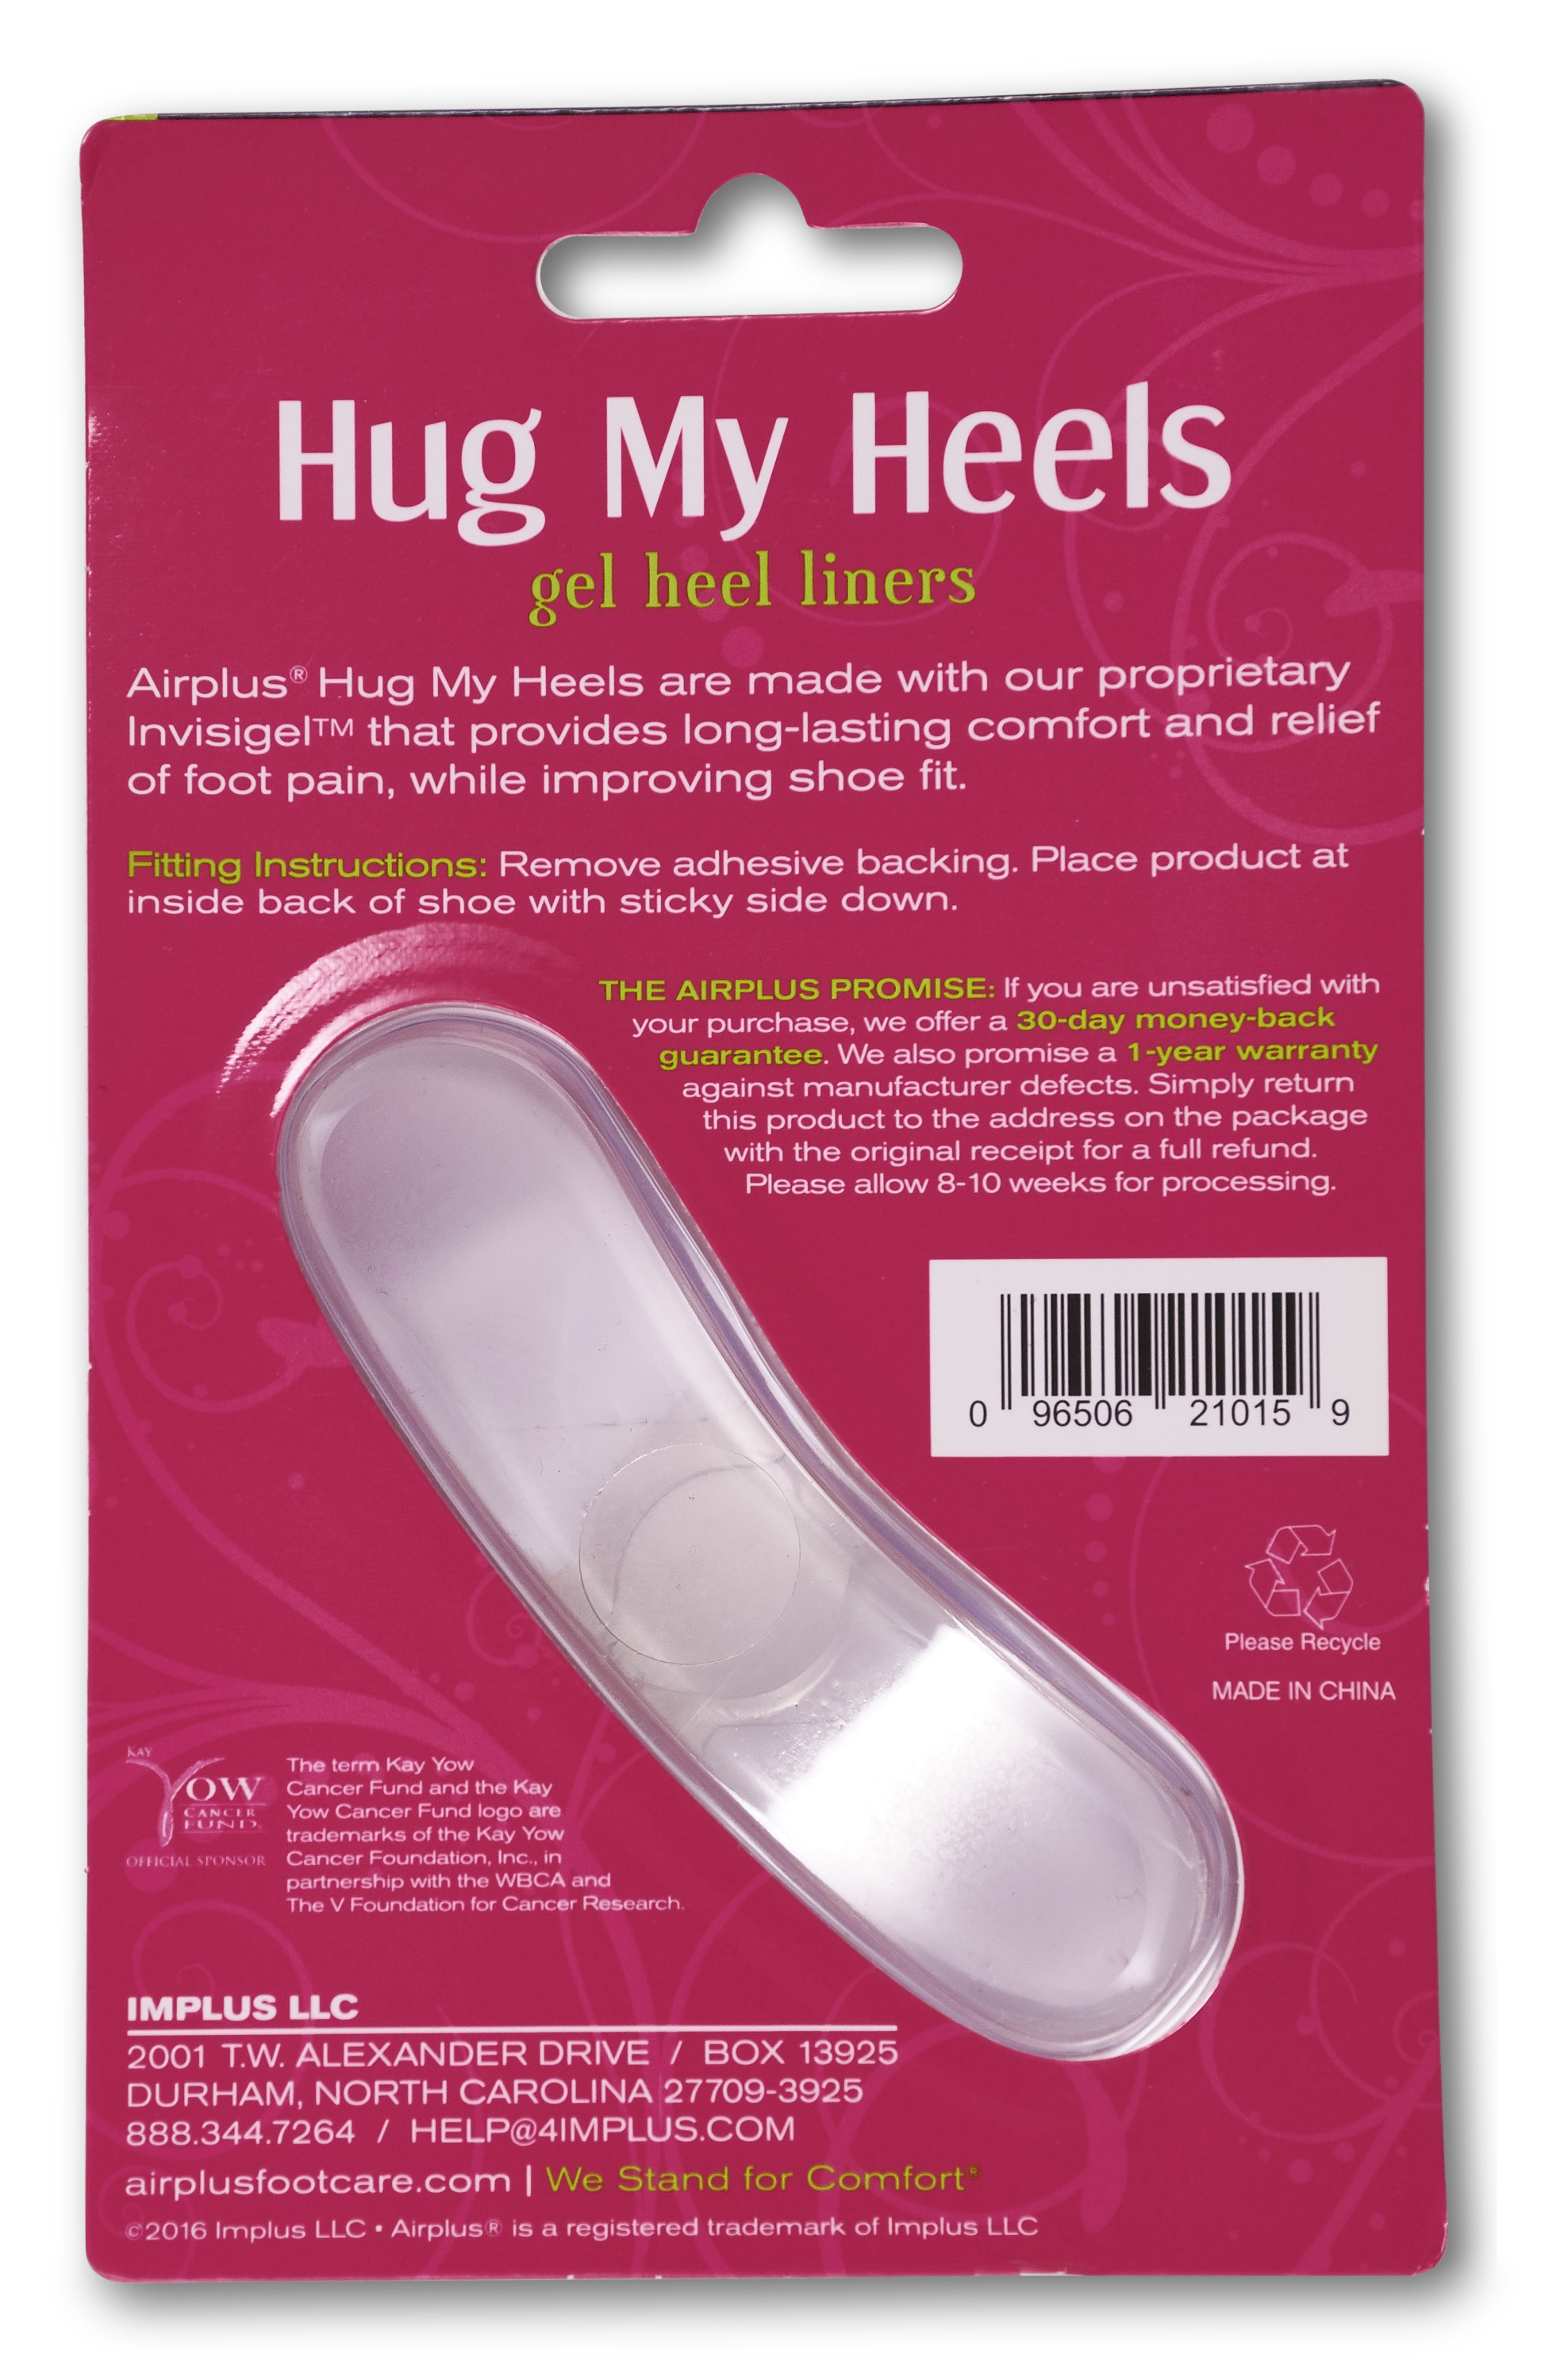 Airplus Invisigel Hug My Heels Cushion Liner Prevents Heel Slippage and Improves Fit, Womens, 1-Pair - image 5 of 5